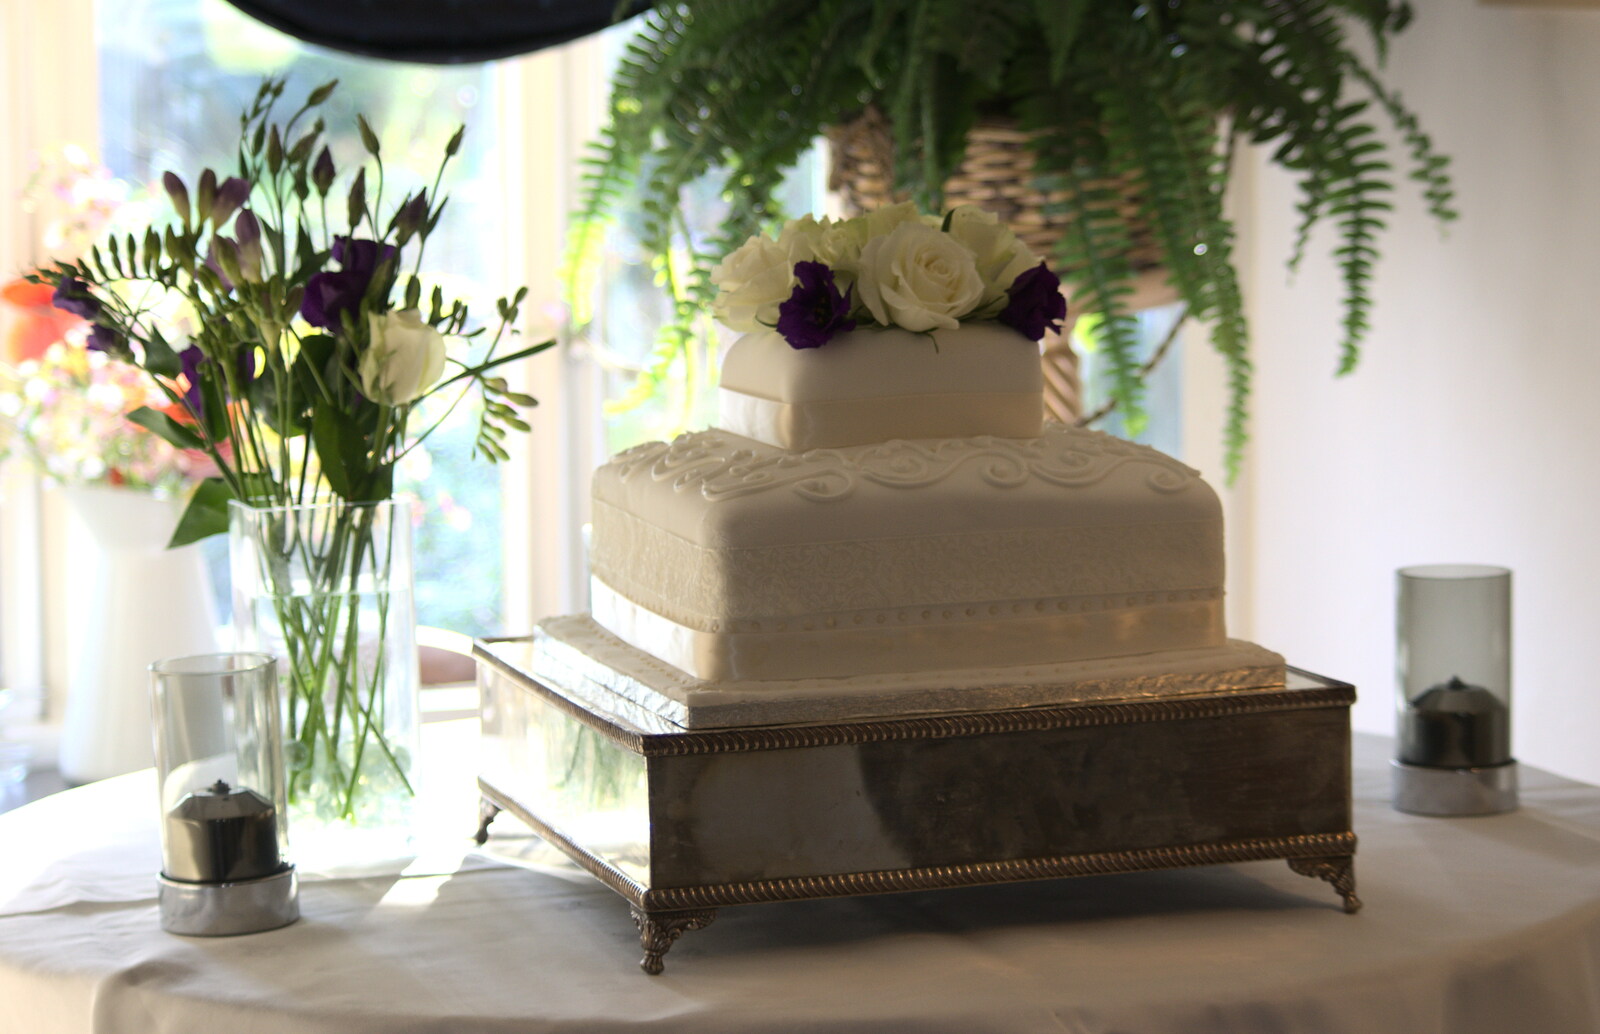 The wedding cake from John and Caroline's Wedding, Sheene Mill, Melbourne, Cambridgeshire - 8th March 2014